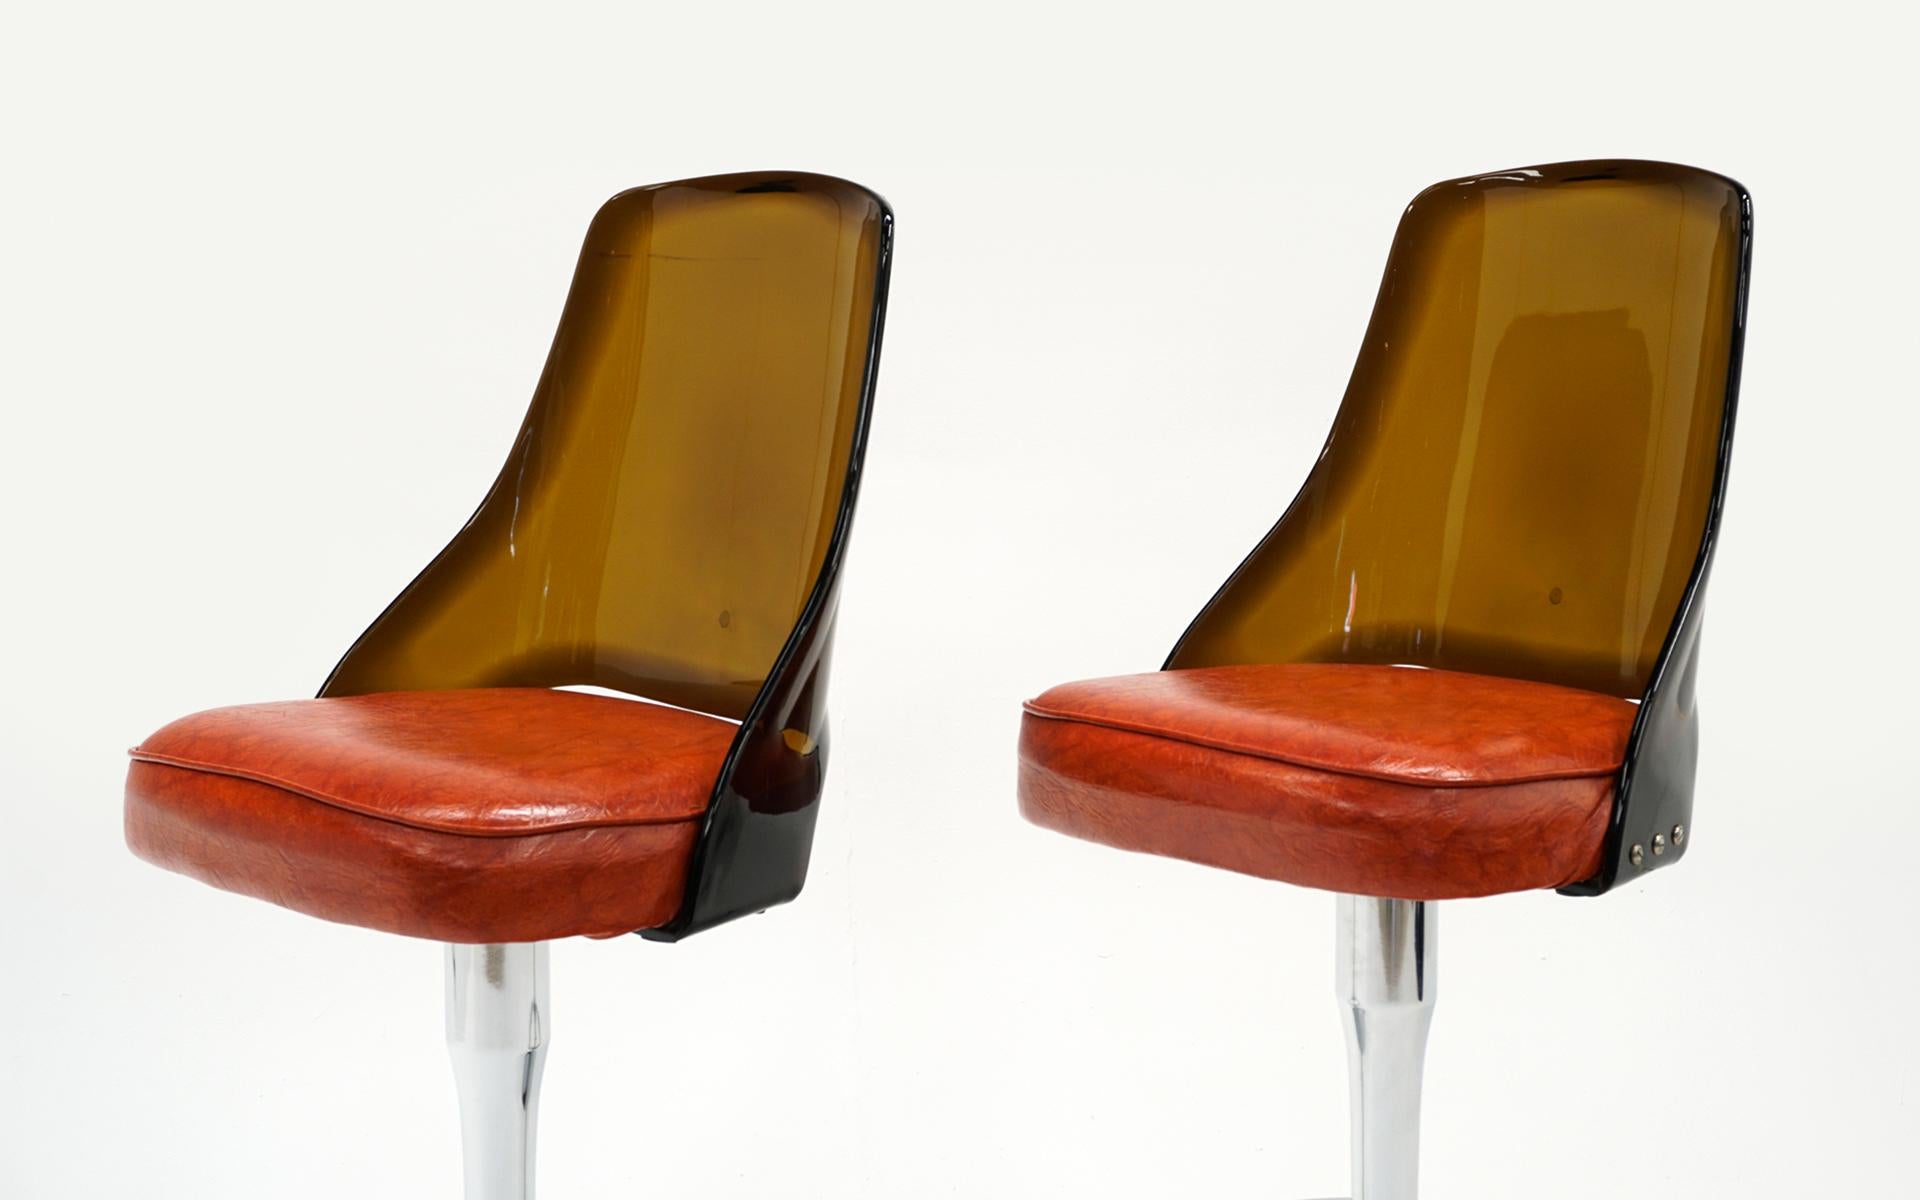 Two bar stools with Lucite backs, chrome frames and orange vinyl upholstery. High quality construction with swivel seats. Small tear to the lower portion of one seat that does not detract from the overall appearance. The seats would also be an easy